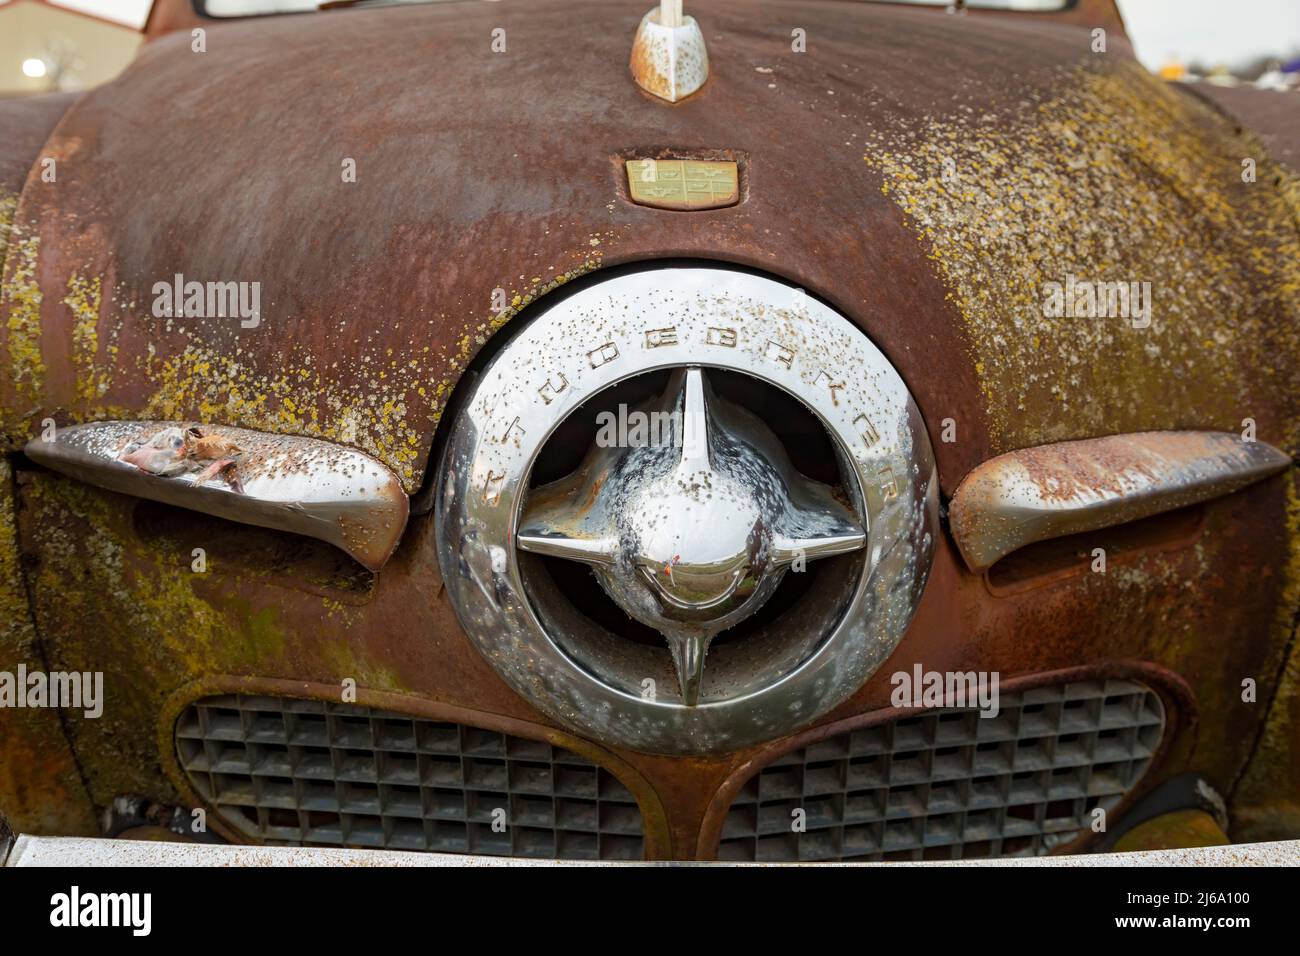 Boaz, Kentucky - A rusty 1950 Studebaker Commander, with its famous bullet nose, at the Anything Goes Trading Company's flea market. Stock Photo